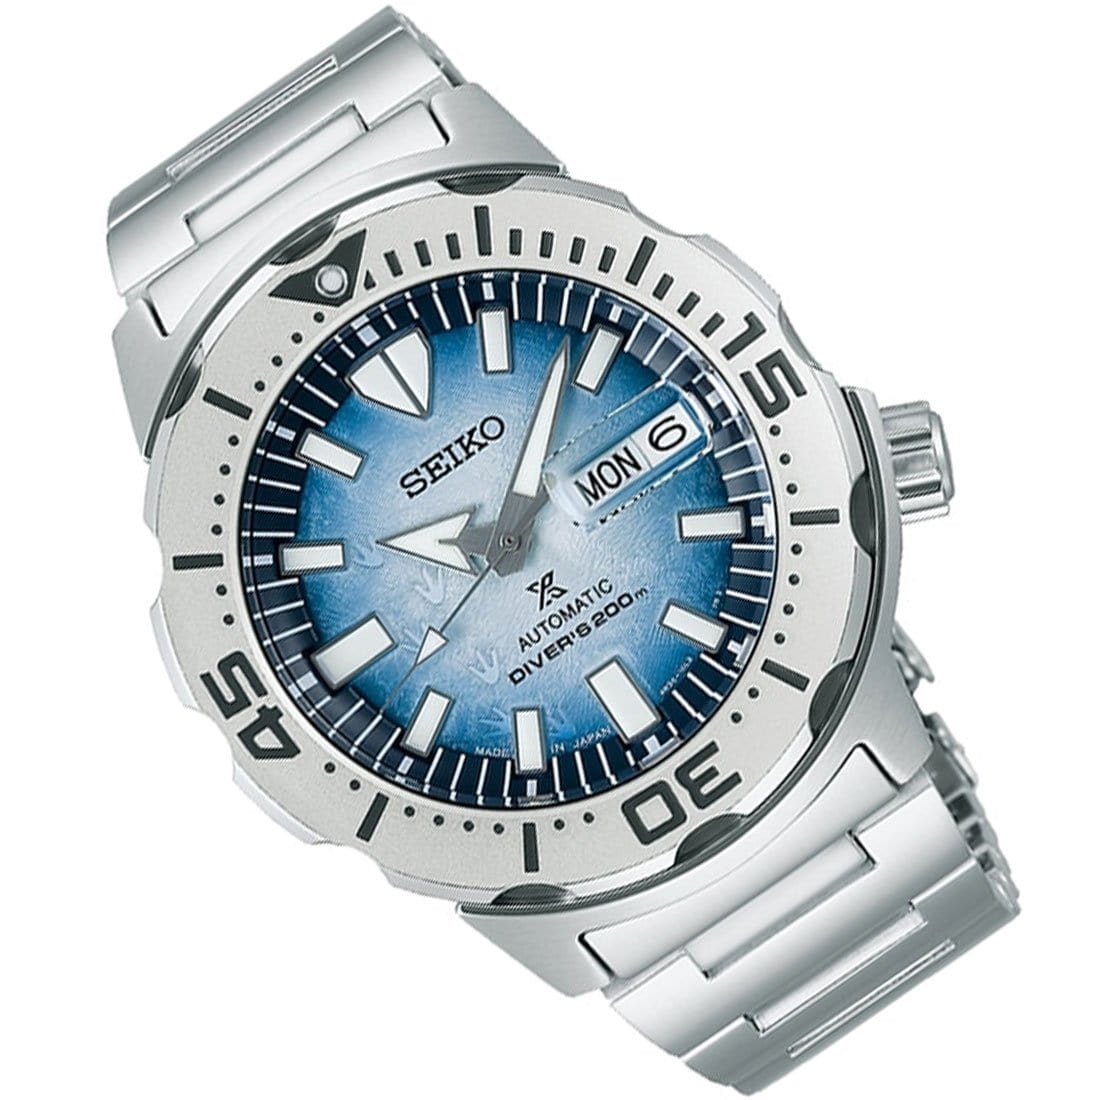 Seiko Prospex Automatic Monster Save the Ocean Divers Watch SBDY105